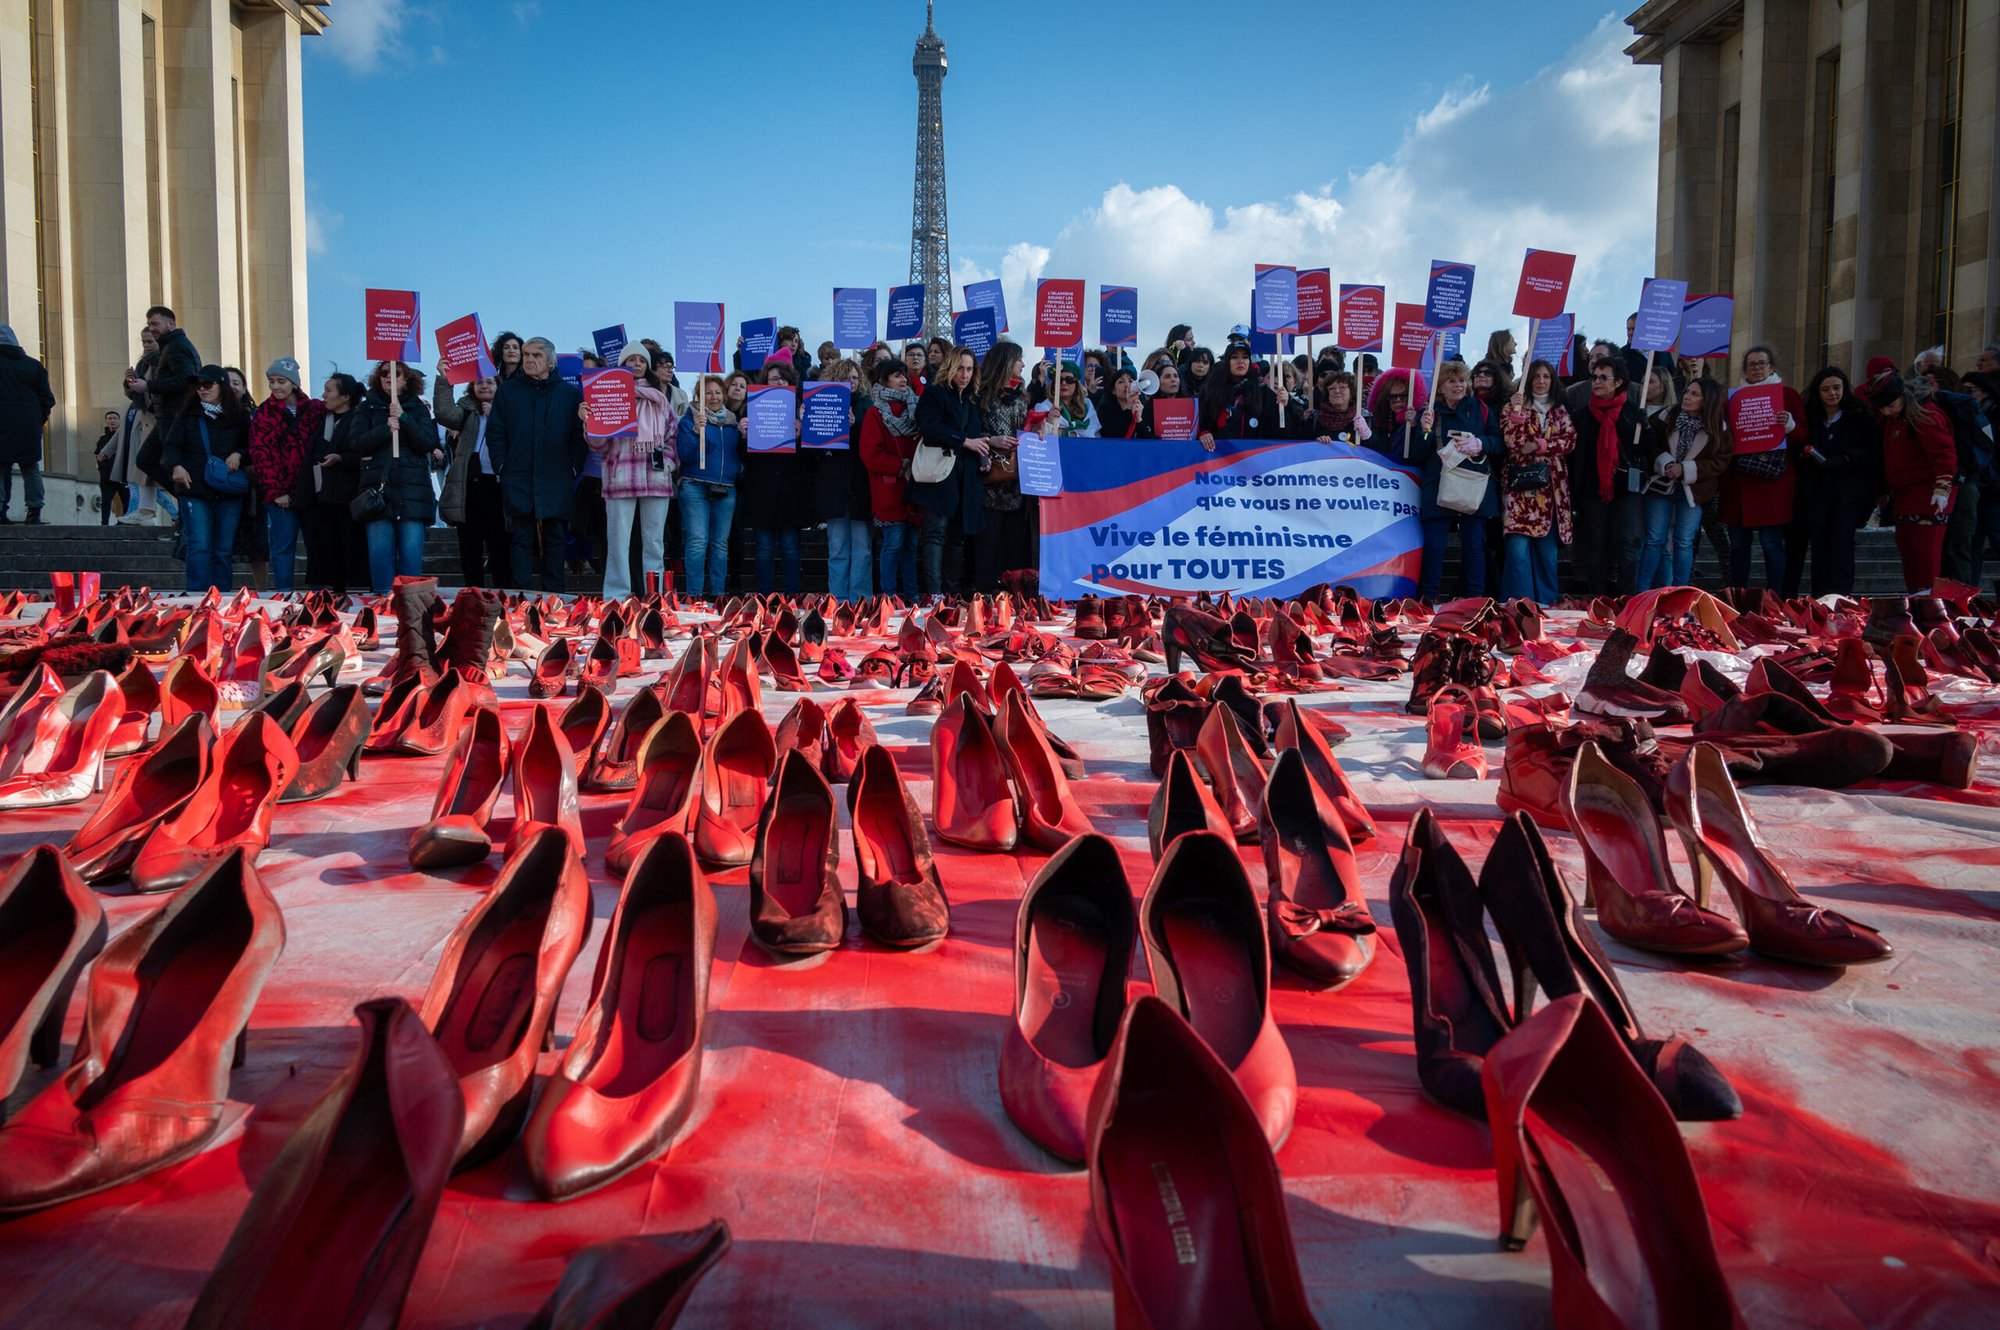 Tens of pairs of shoes covered in red paint is art installation that symbolizes all the victims of femicides.